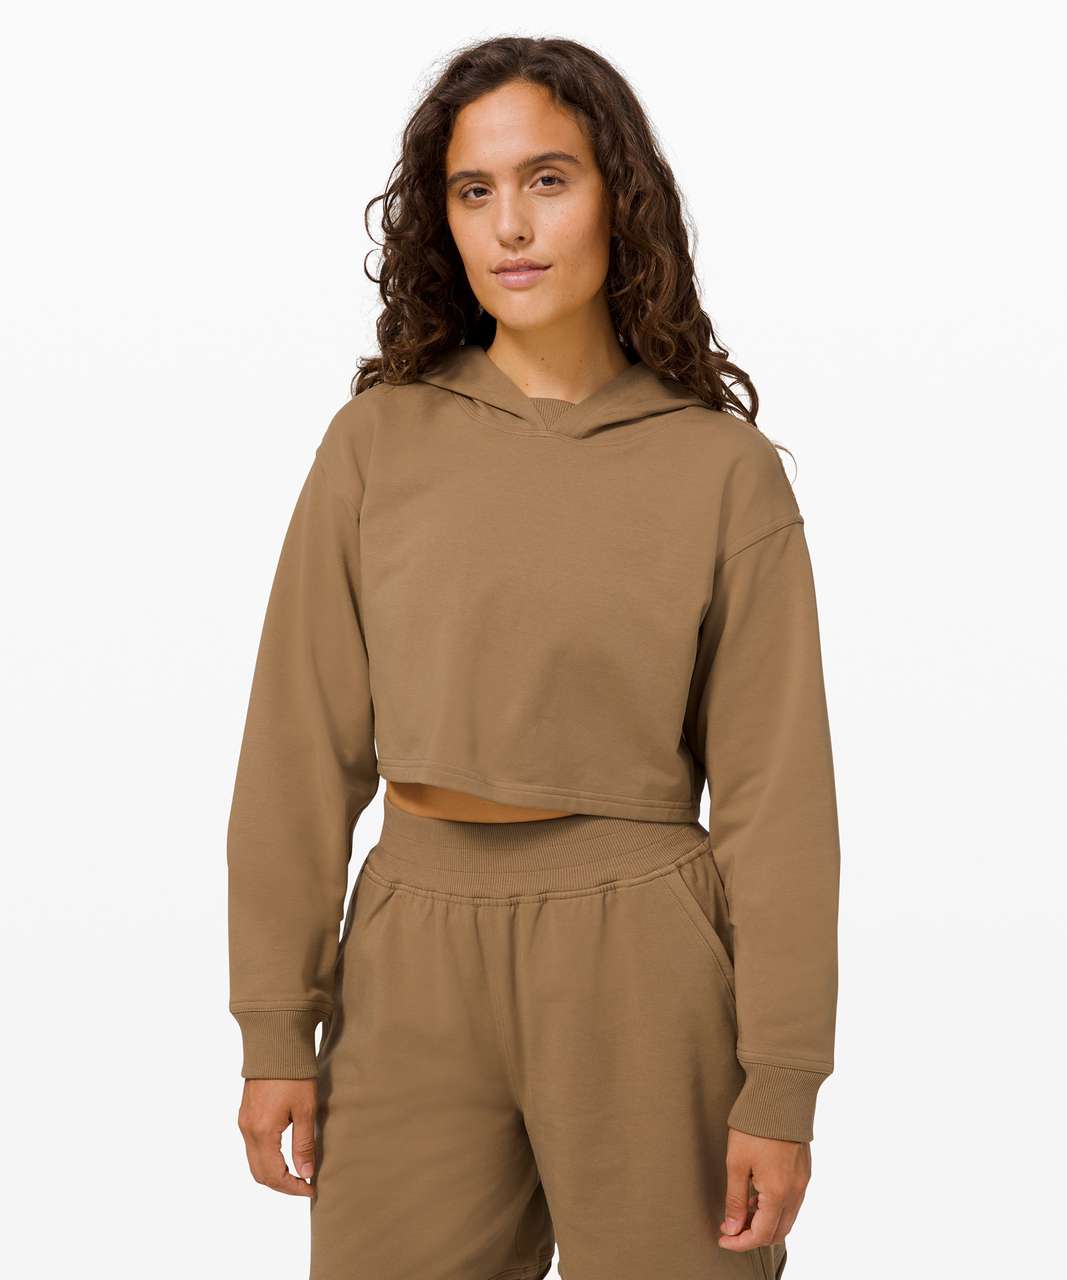 Lululemon LA all yours cropped hoodie